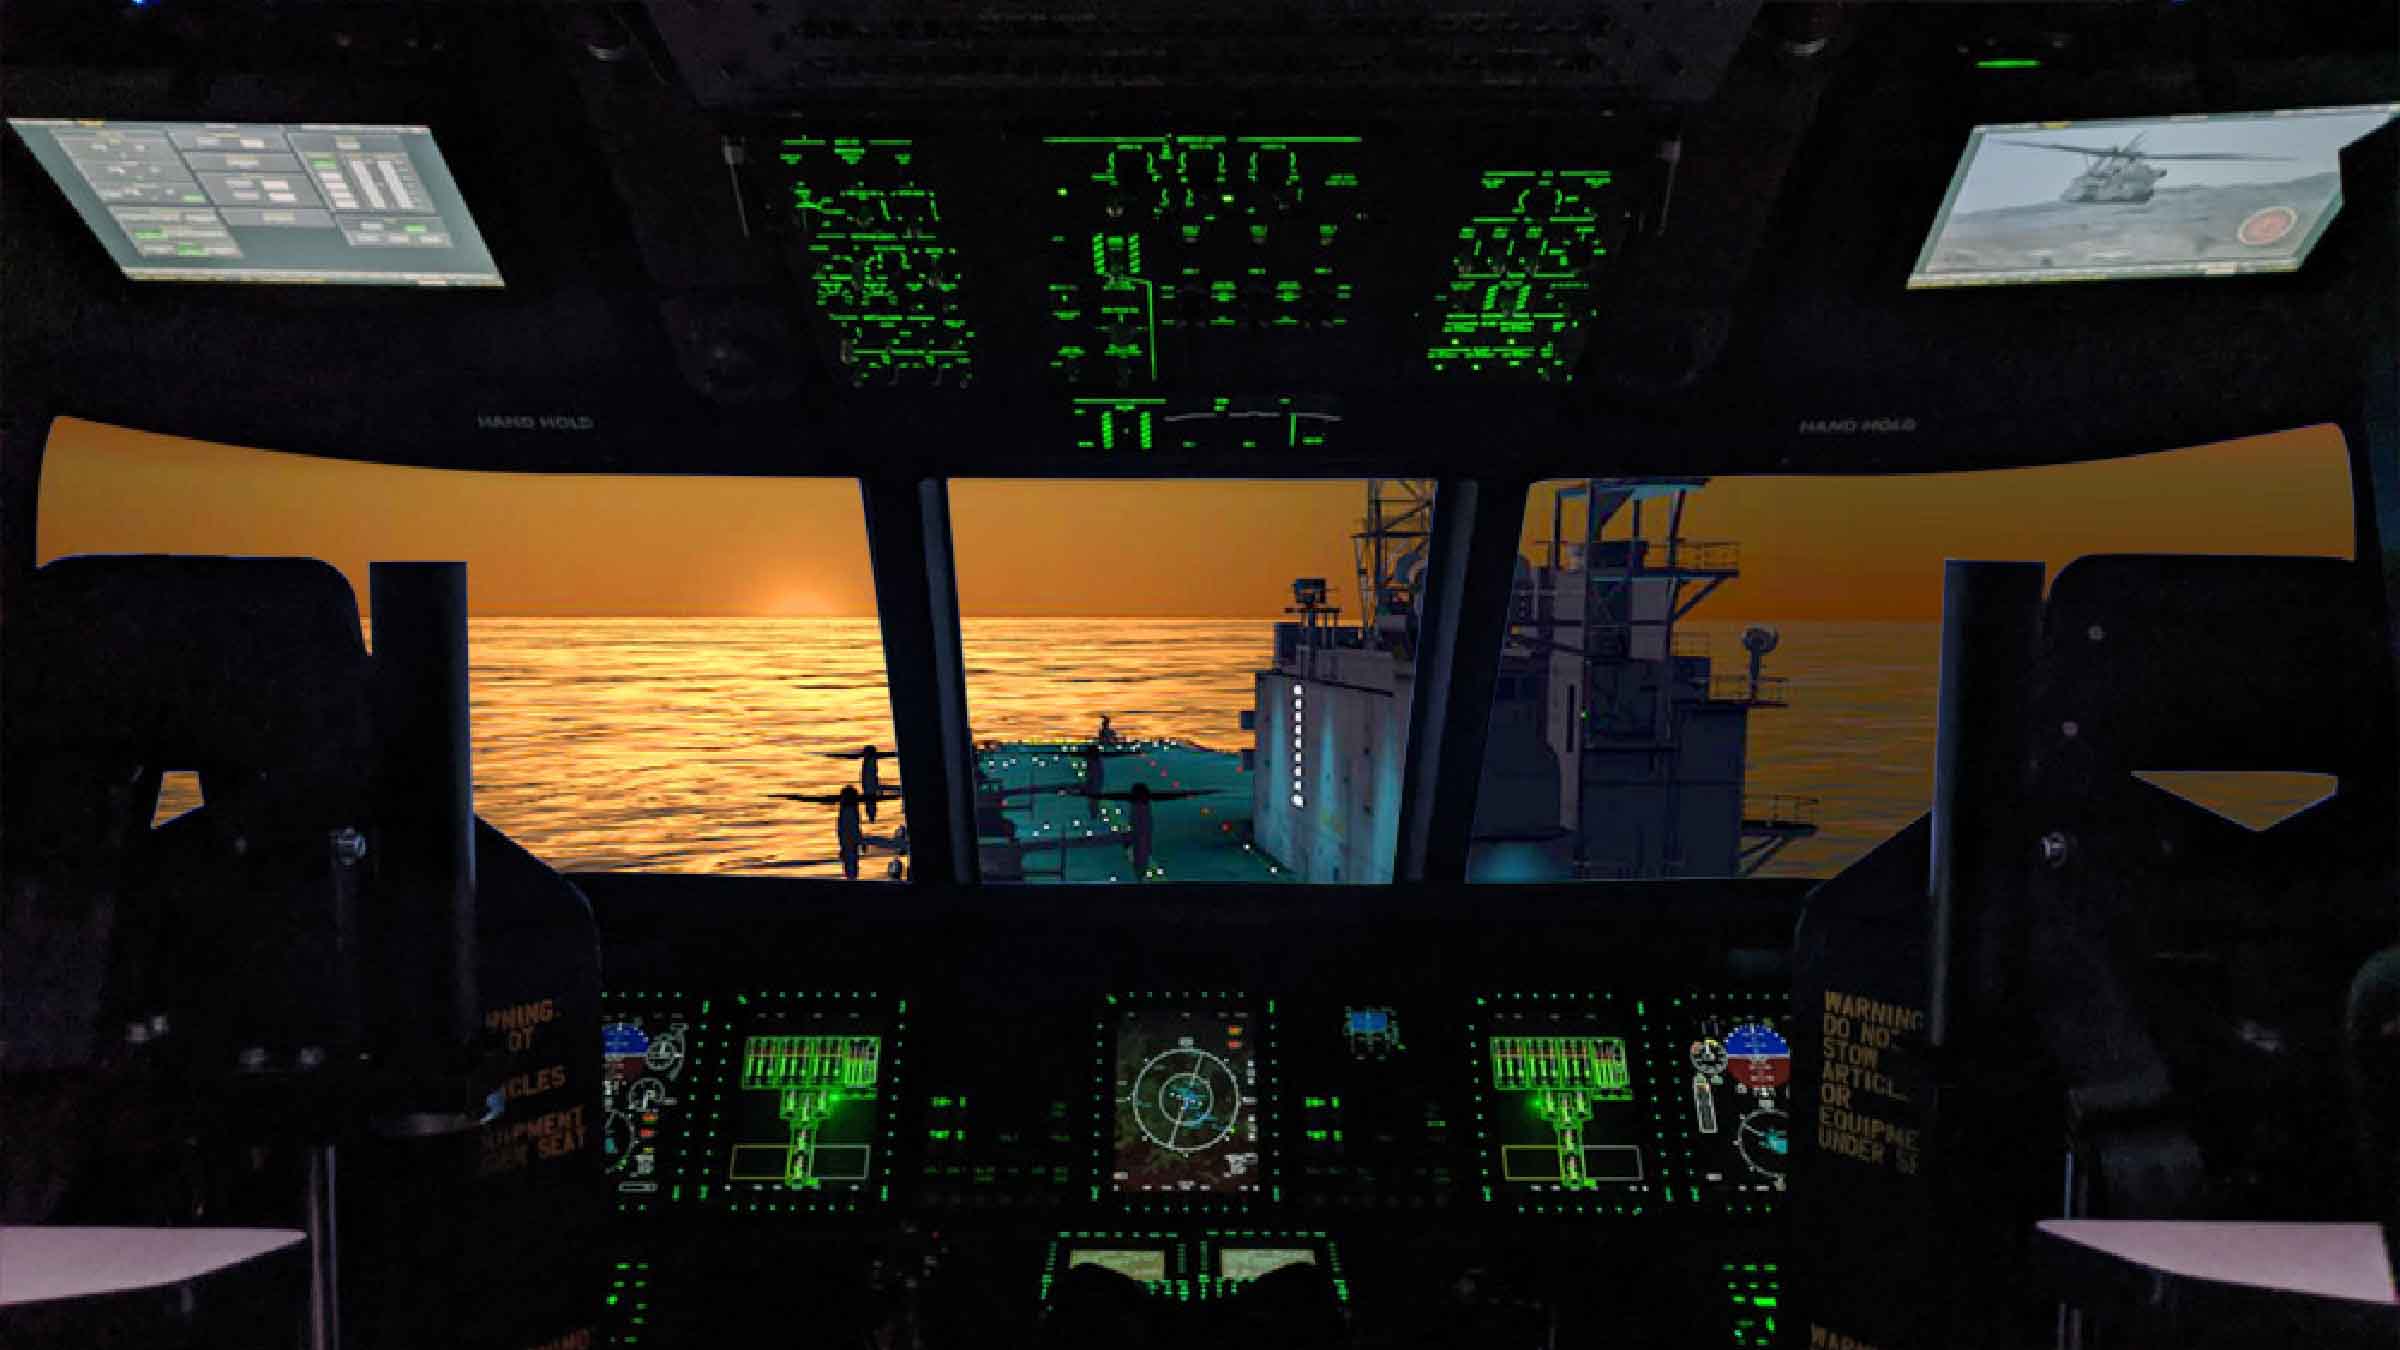 A view of the ocean from the cockpit of a military aircraft, with a warship visible on the horizon.